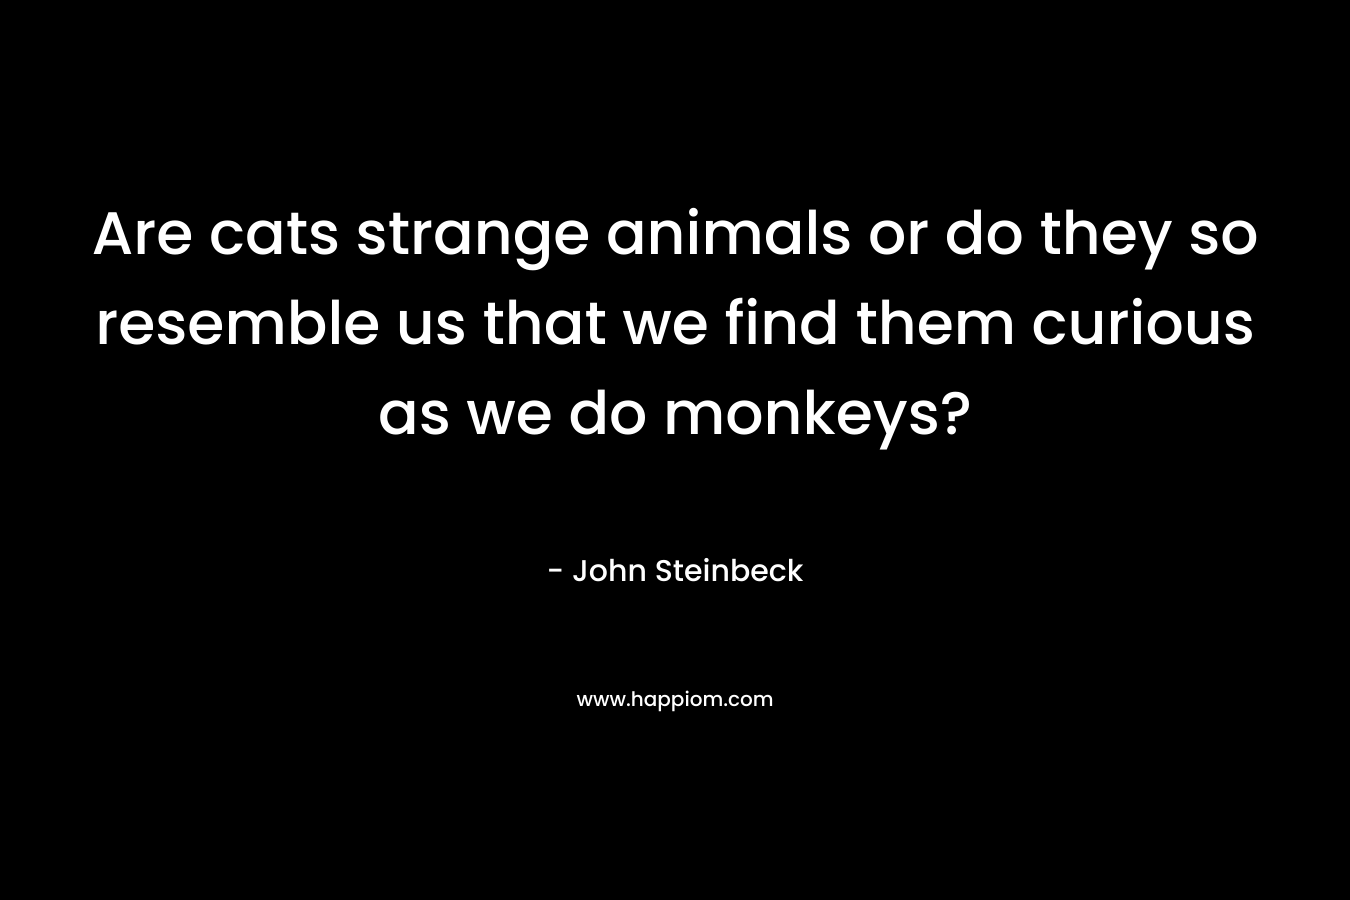 Are cats strange animals or do they so resemble us that we find them curious as we do monkeys? – John Steinbeck